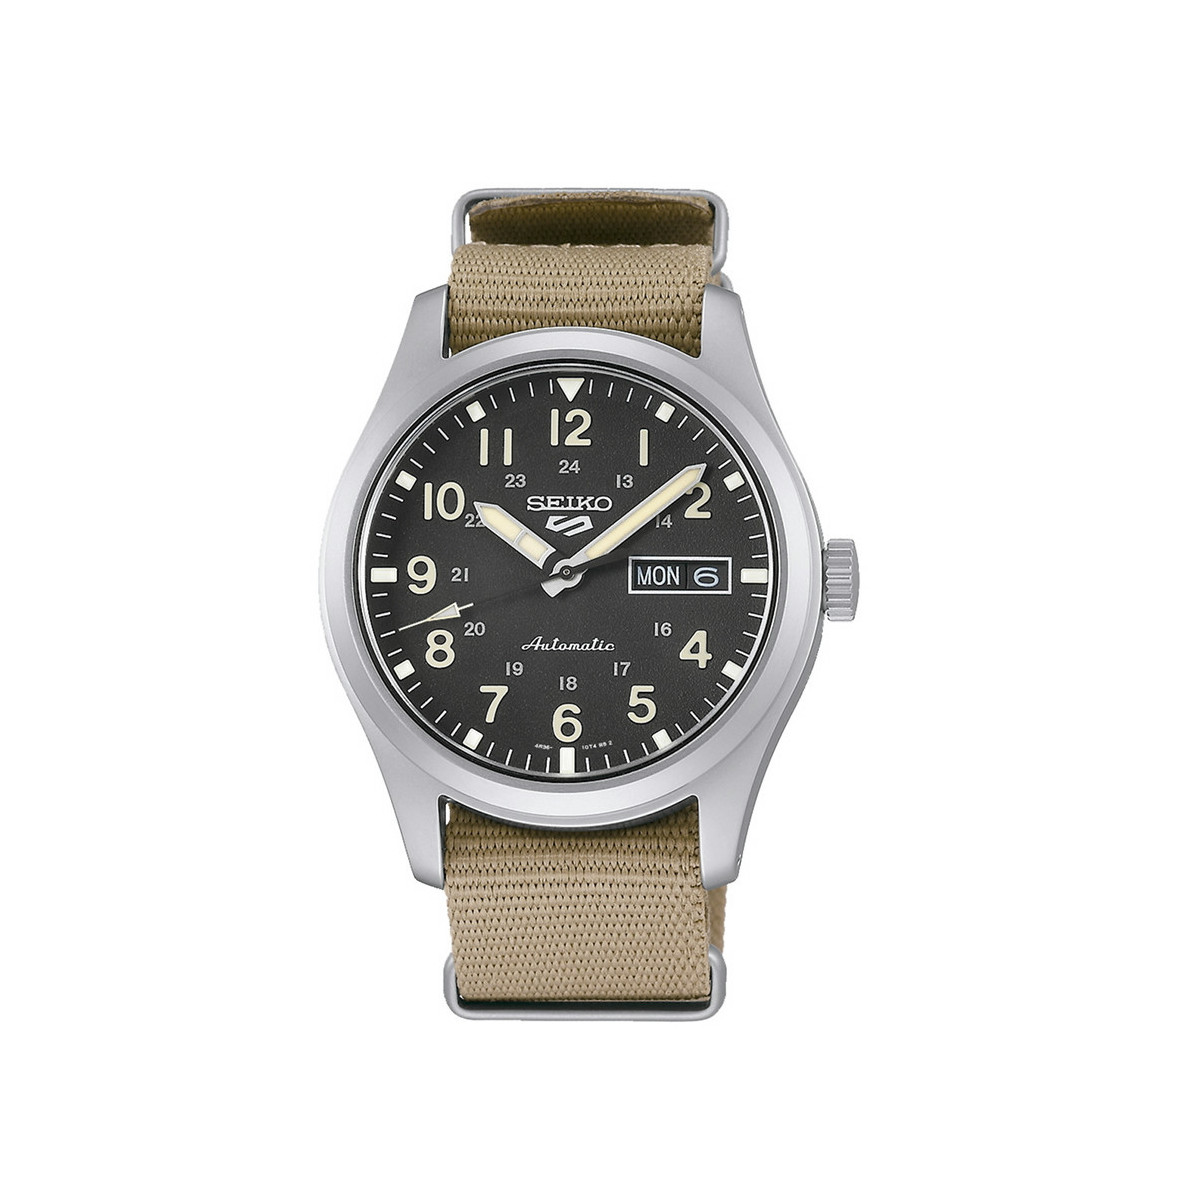 Watches With Military / Zapata Jewelers